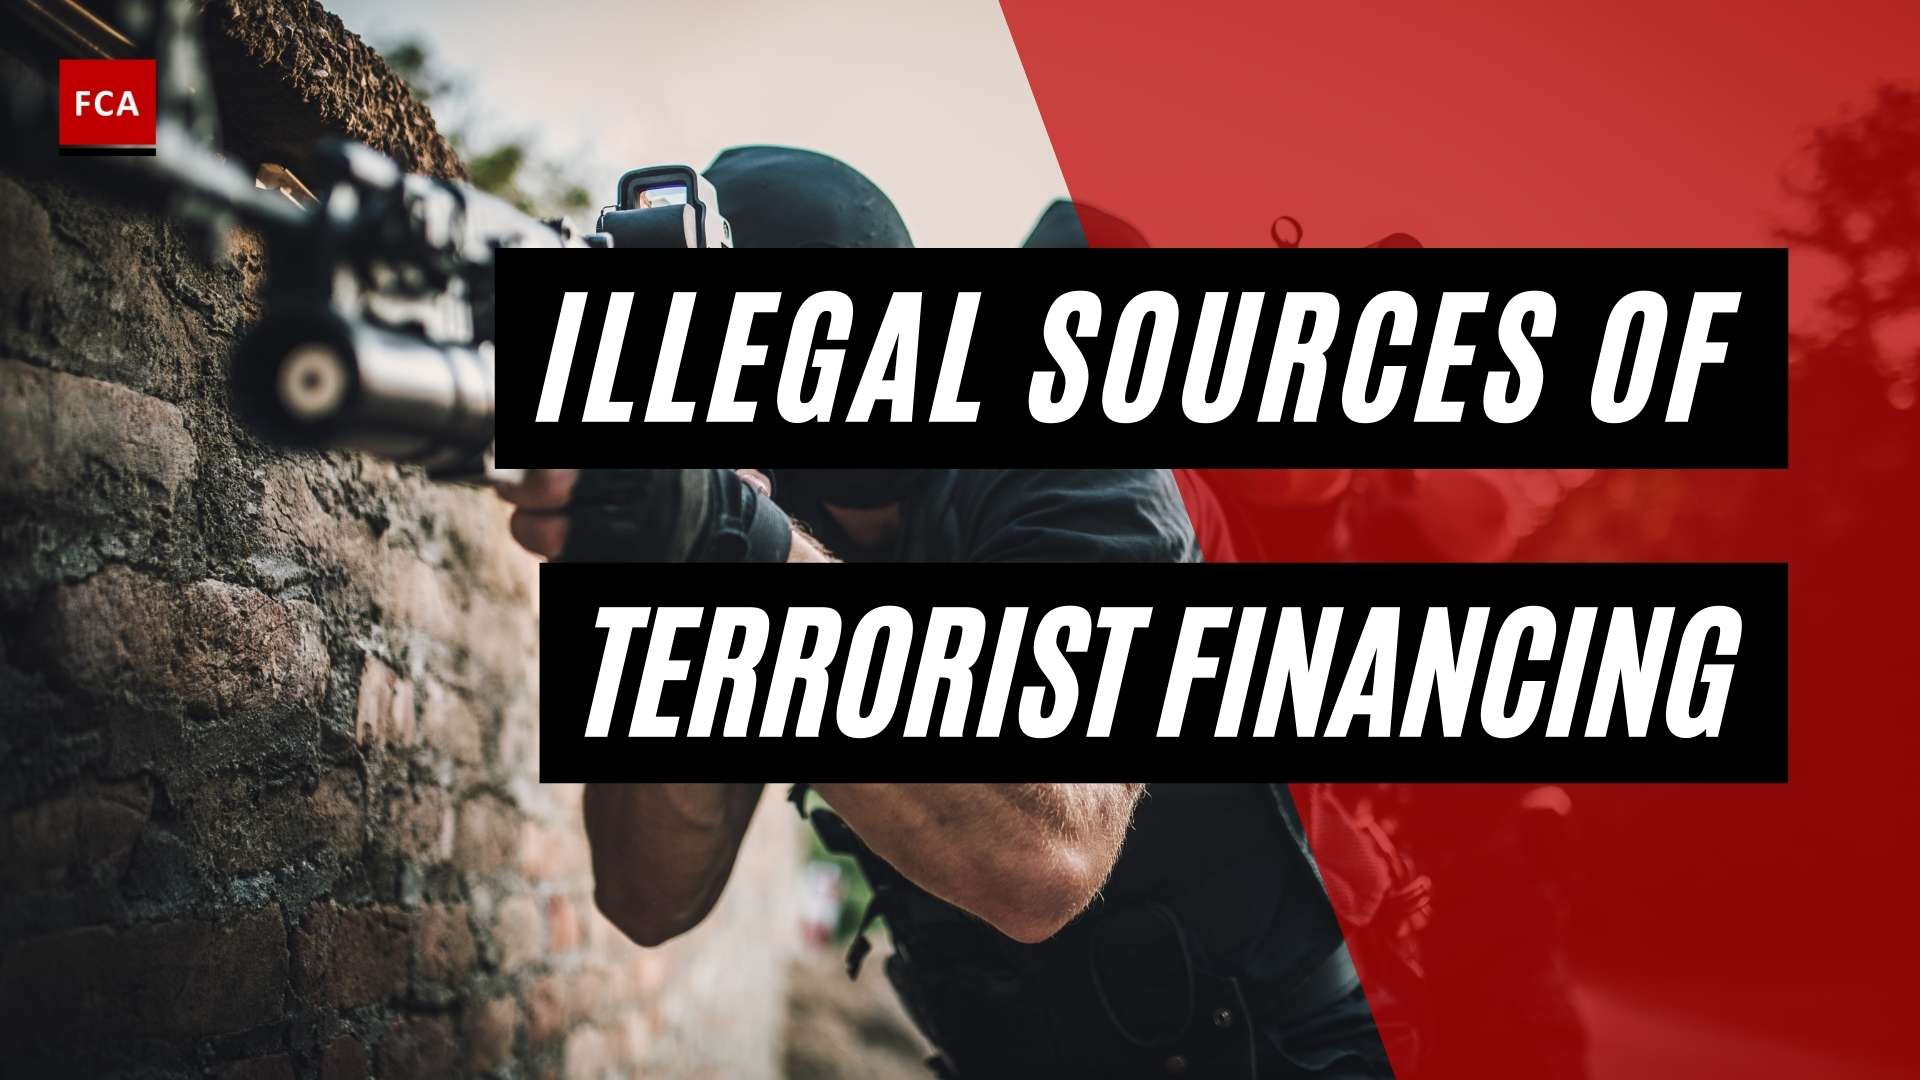 Illegal Sources Of Terrorist Financing - Featured Image